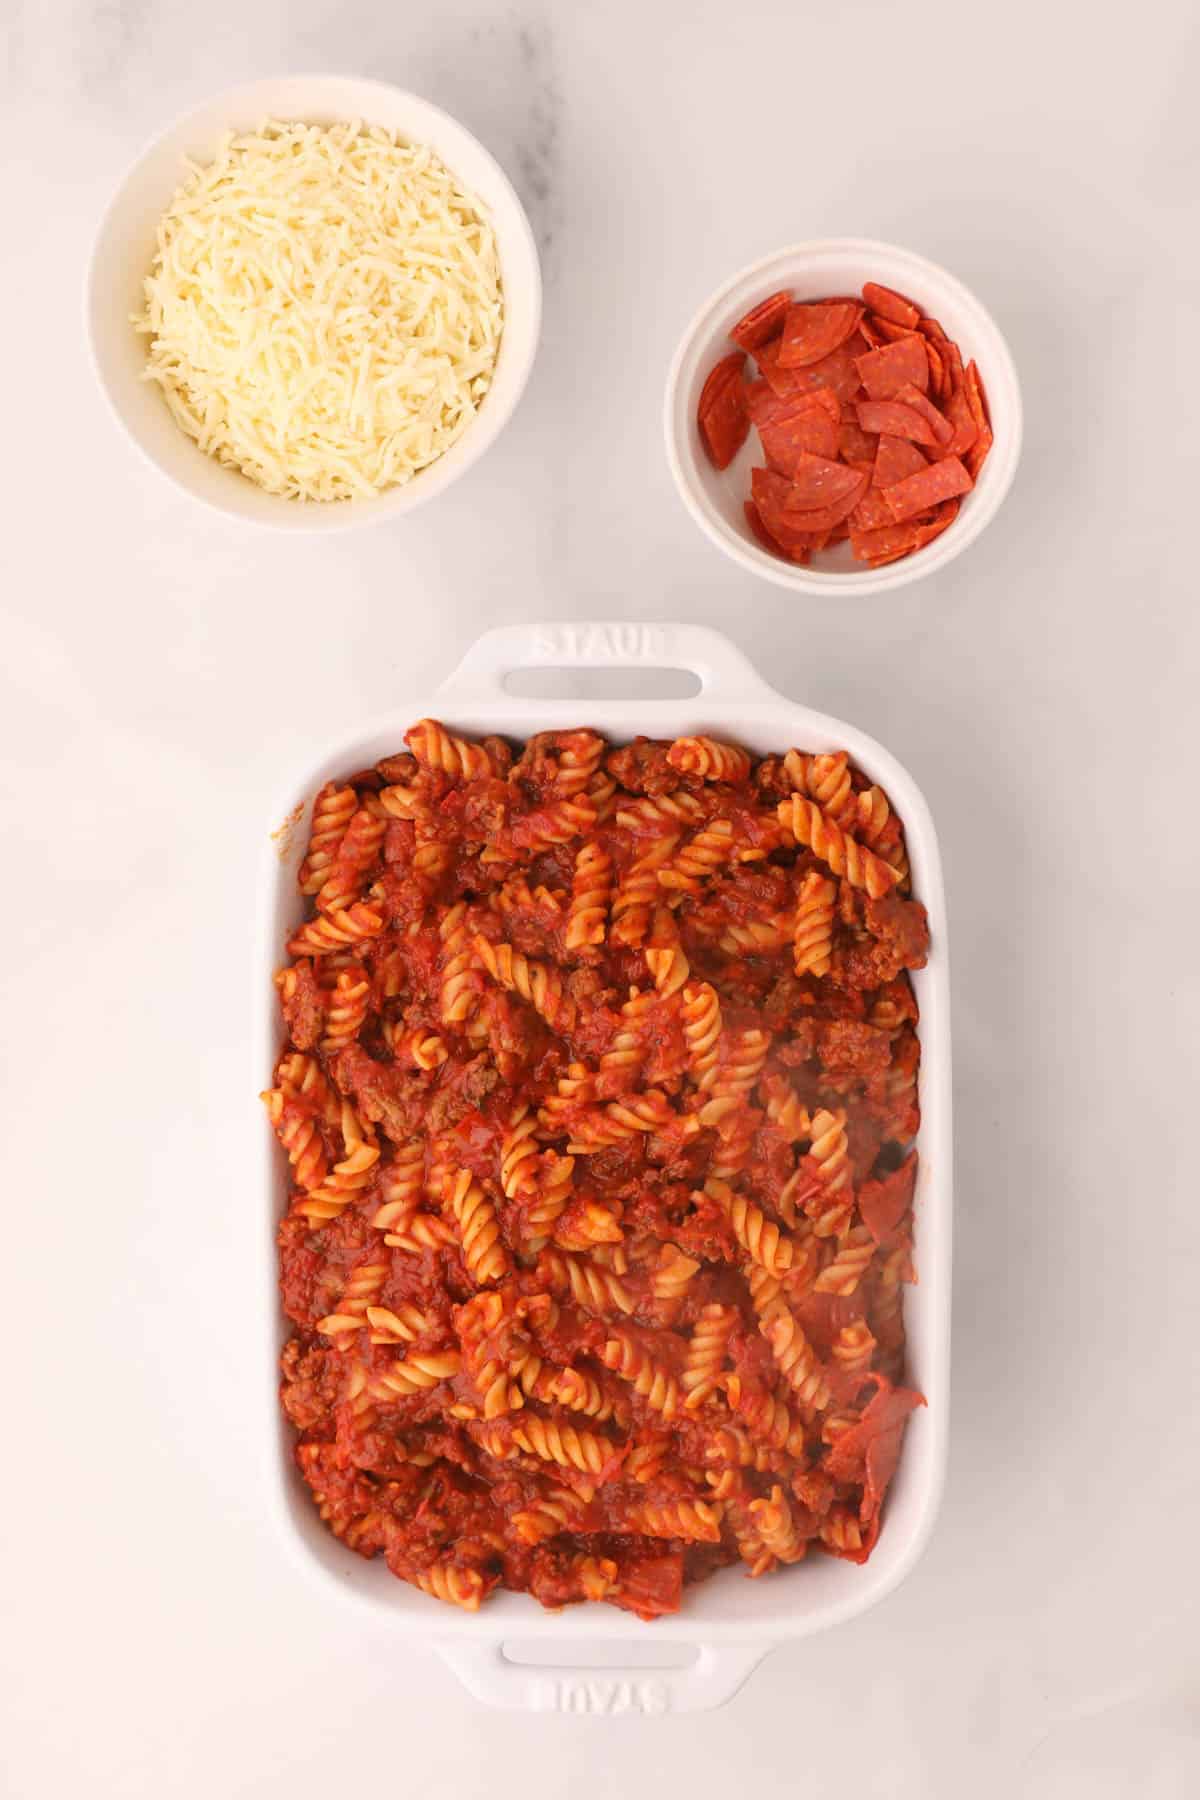 A white casserole dish filled with pasta tossed with meaty Italian sausage marinara sauce.